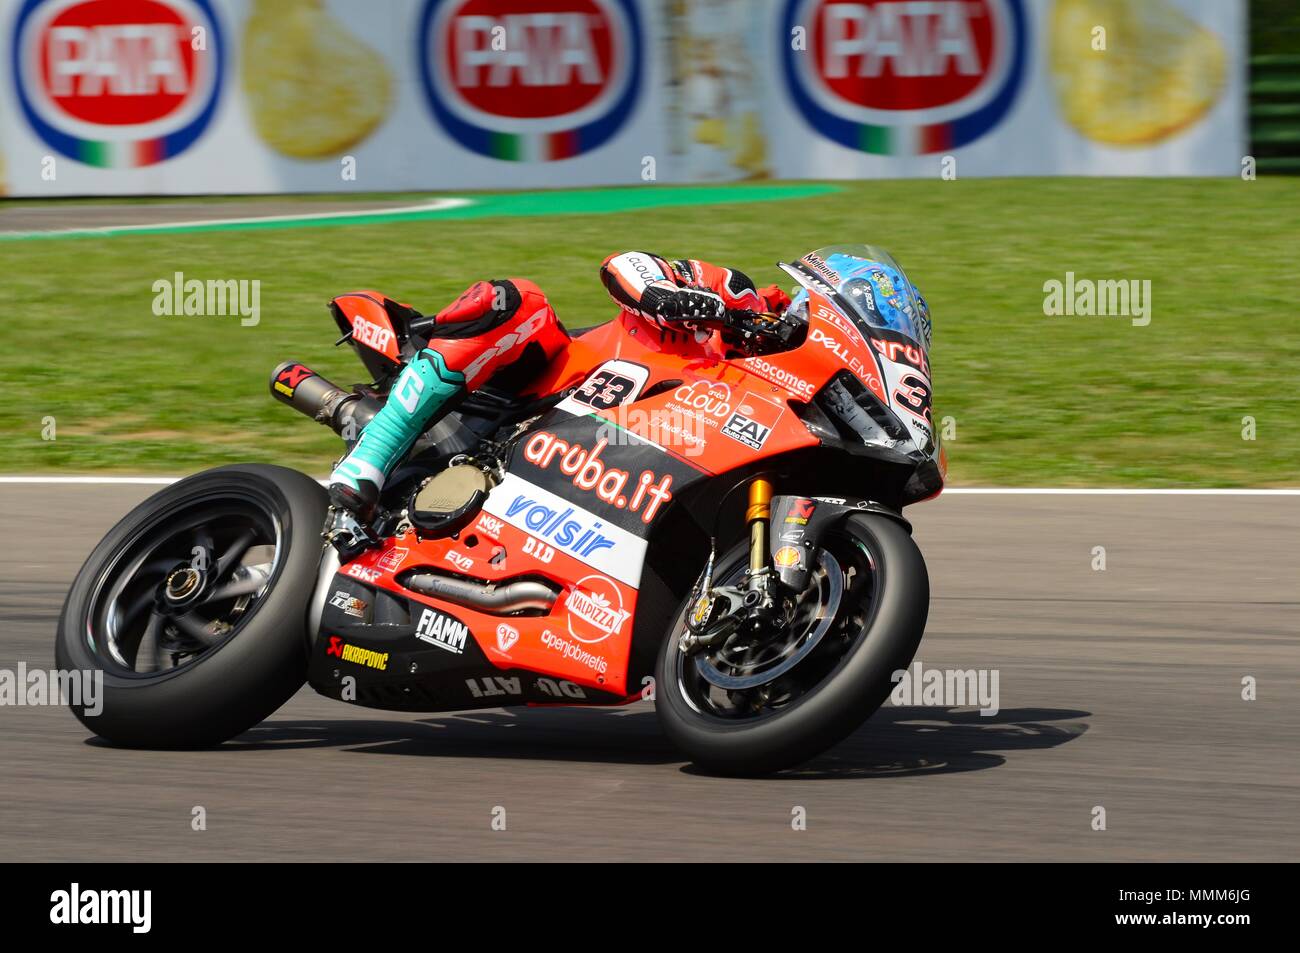 Ducati Racing Bike High Resolution Stock Photography And Images Page 8 Alamy